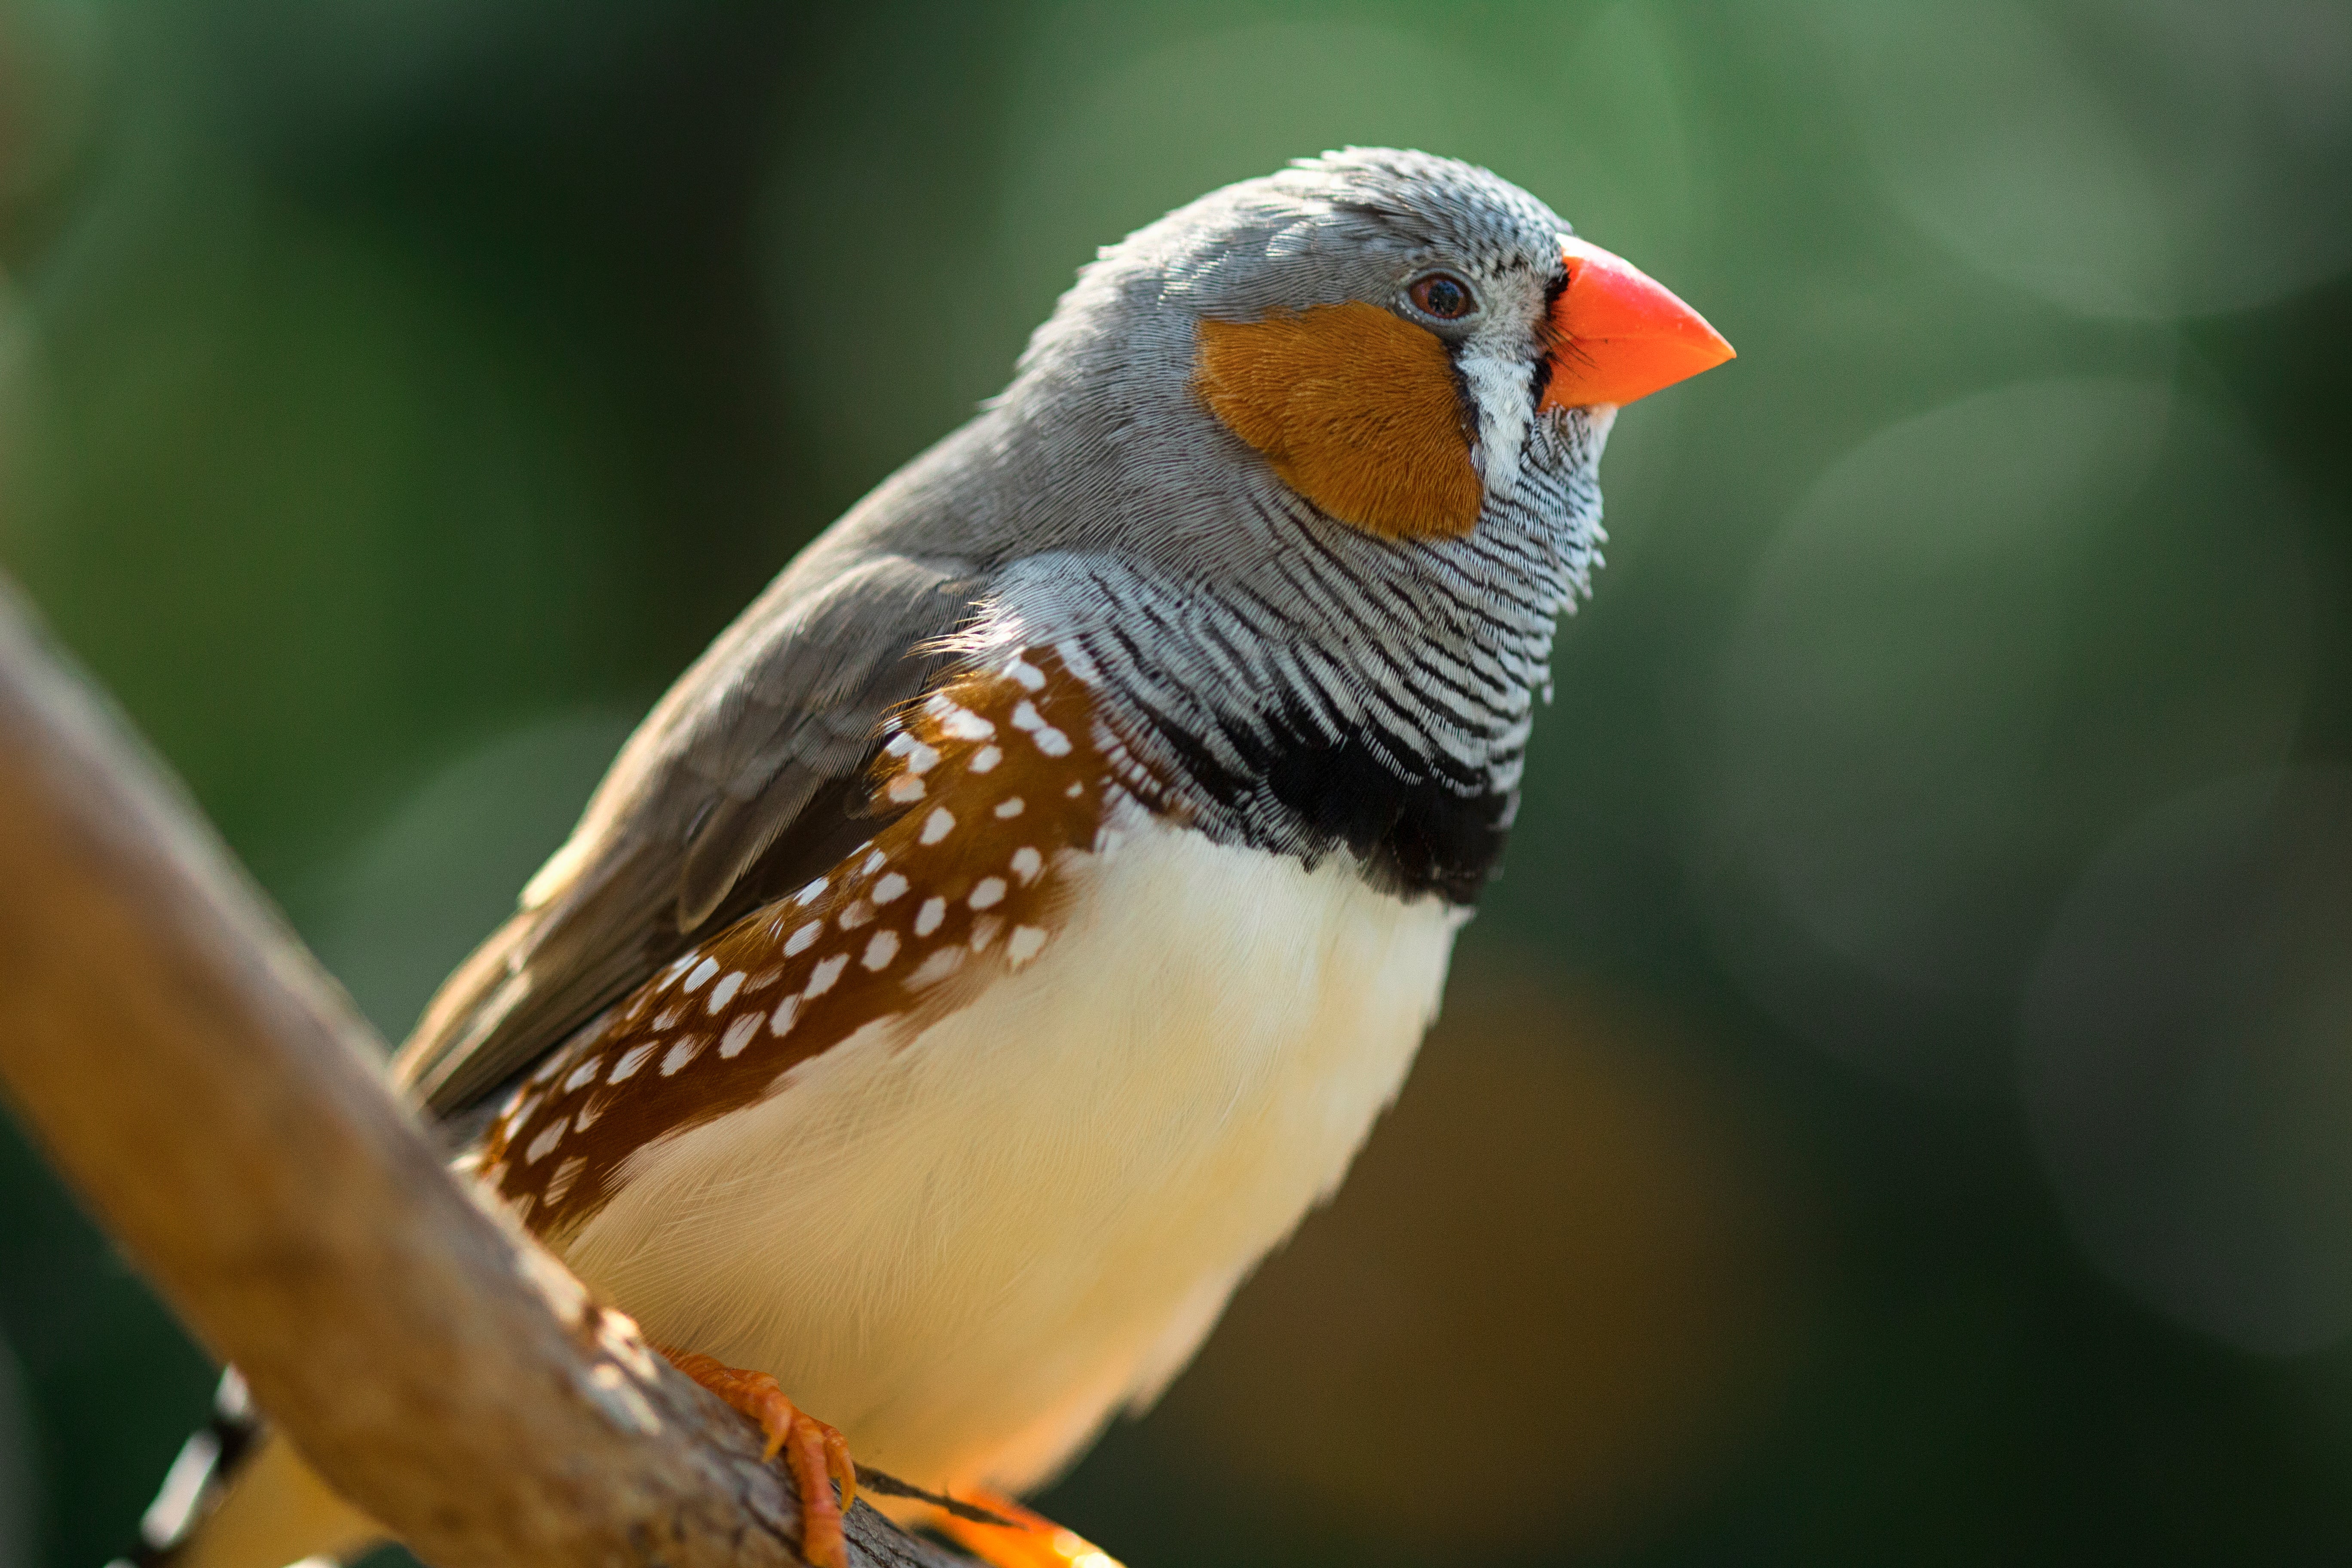 Male Songbirds Need Daily Vocal Practice to Woo Females